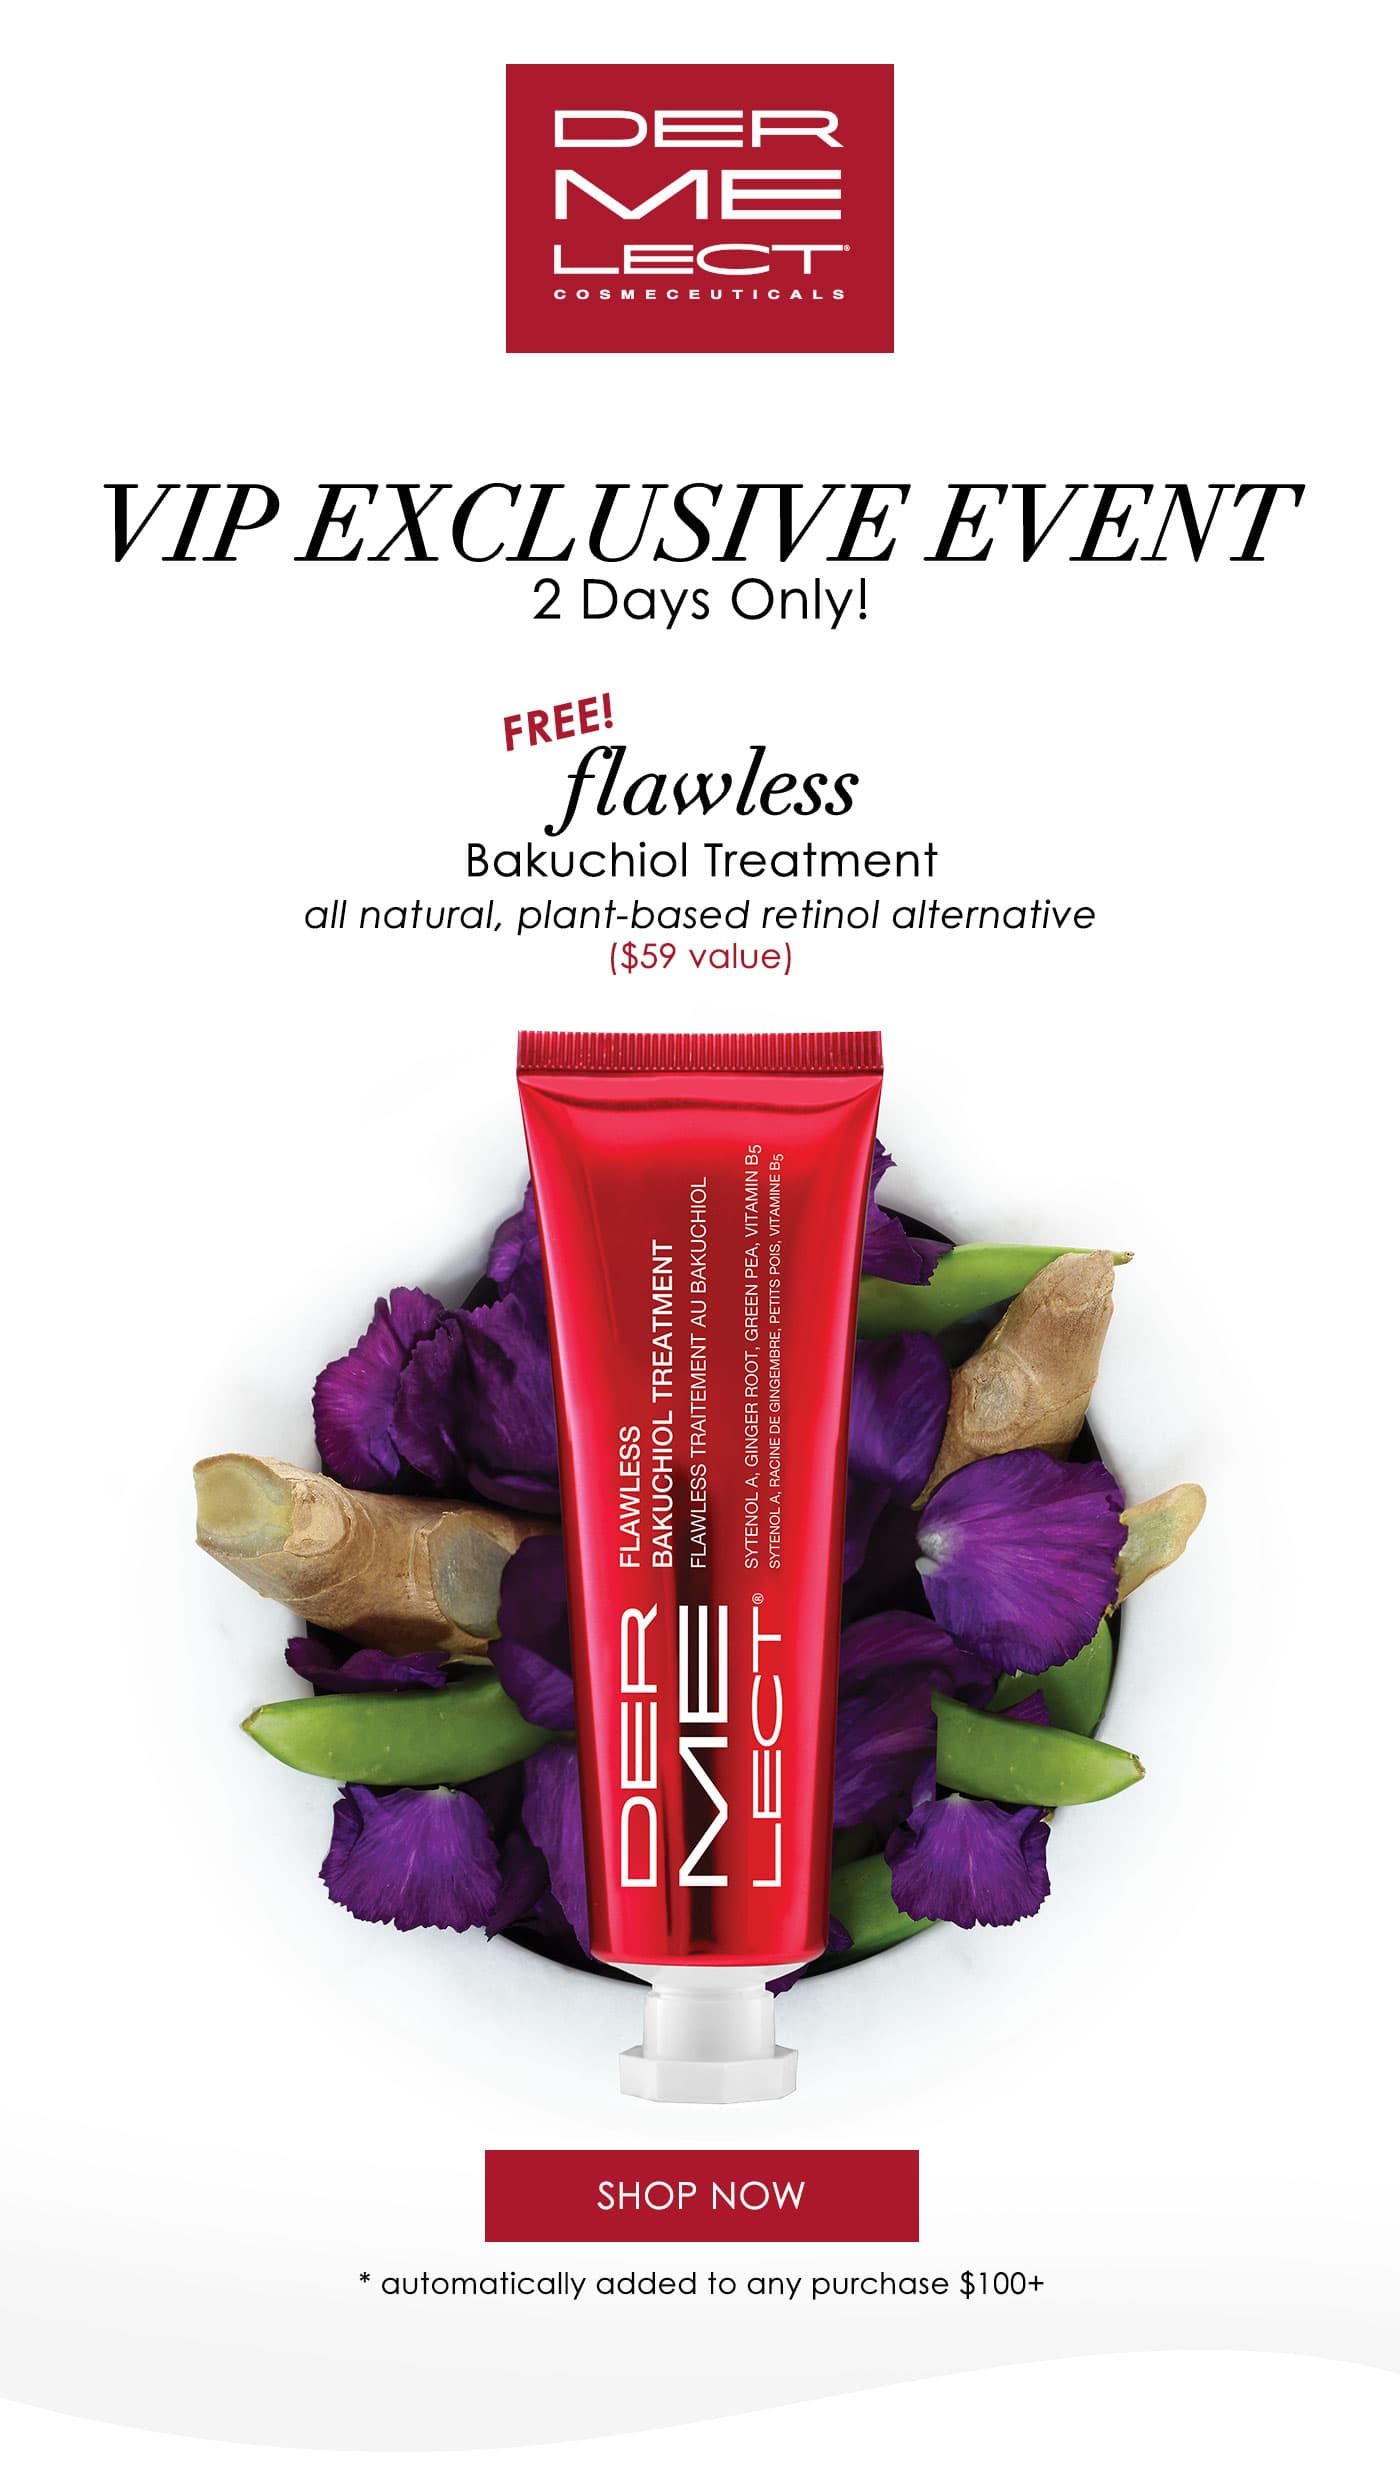 VIP Exclusive EVENT! FREE Flawless Tube, 2 Days Only!